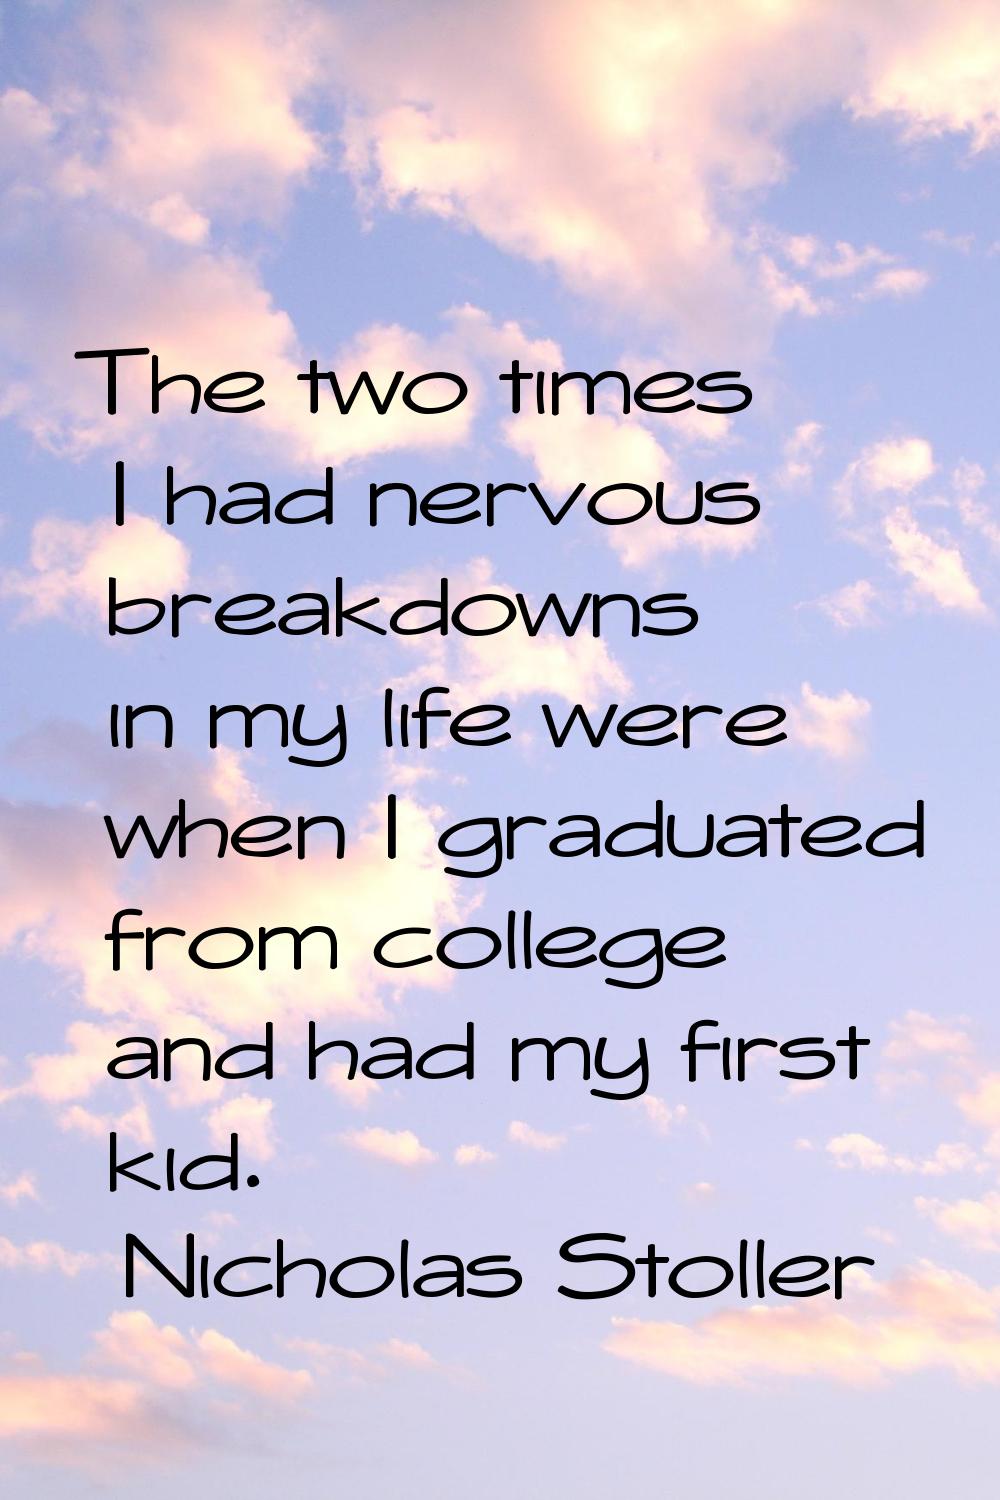 The two times I had nervous breakdowns in my life were when I graduated from college and had my fir